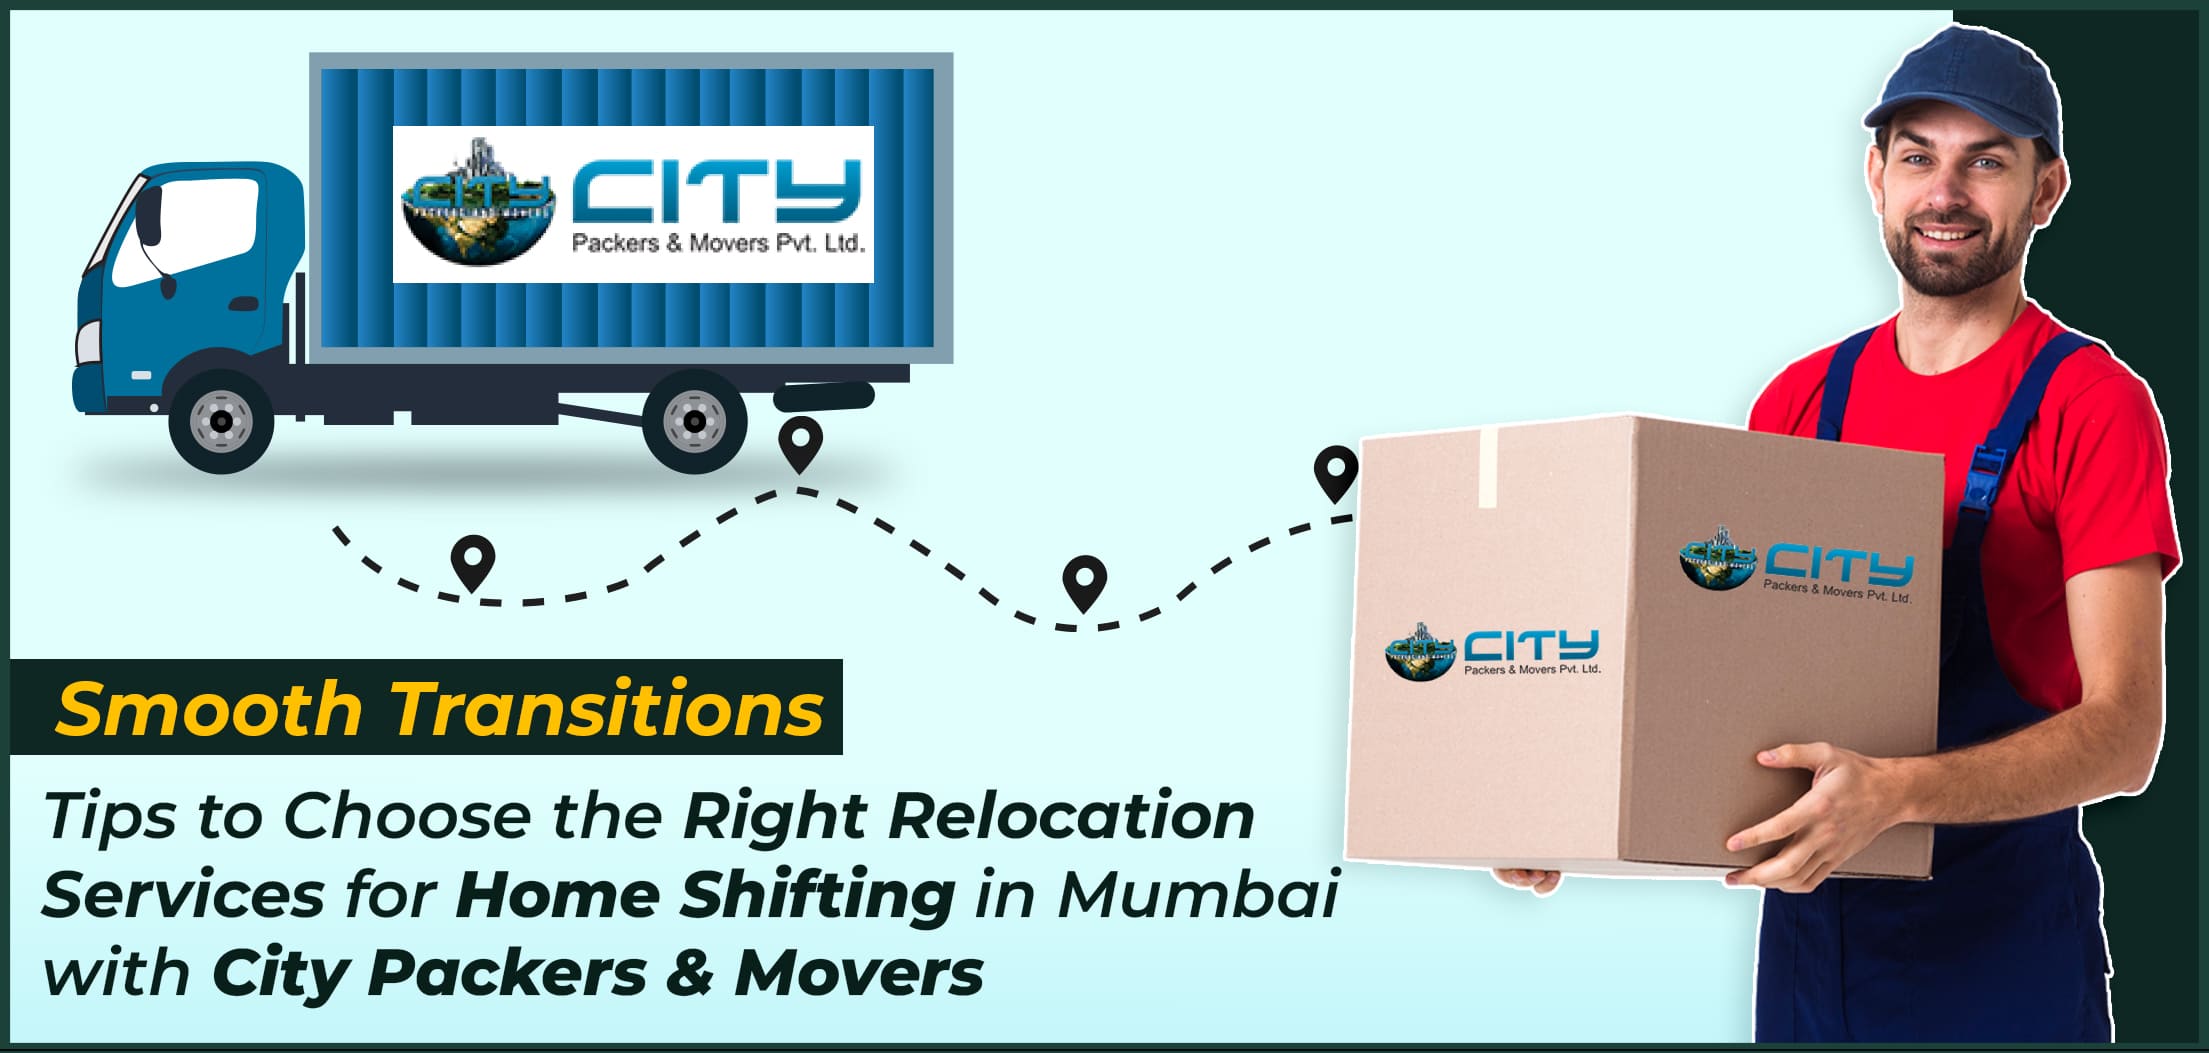 Relocation Services for Home Shifting in Mumbai